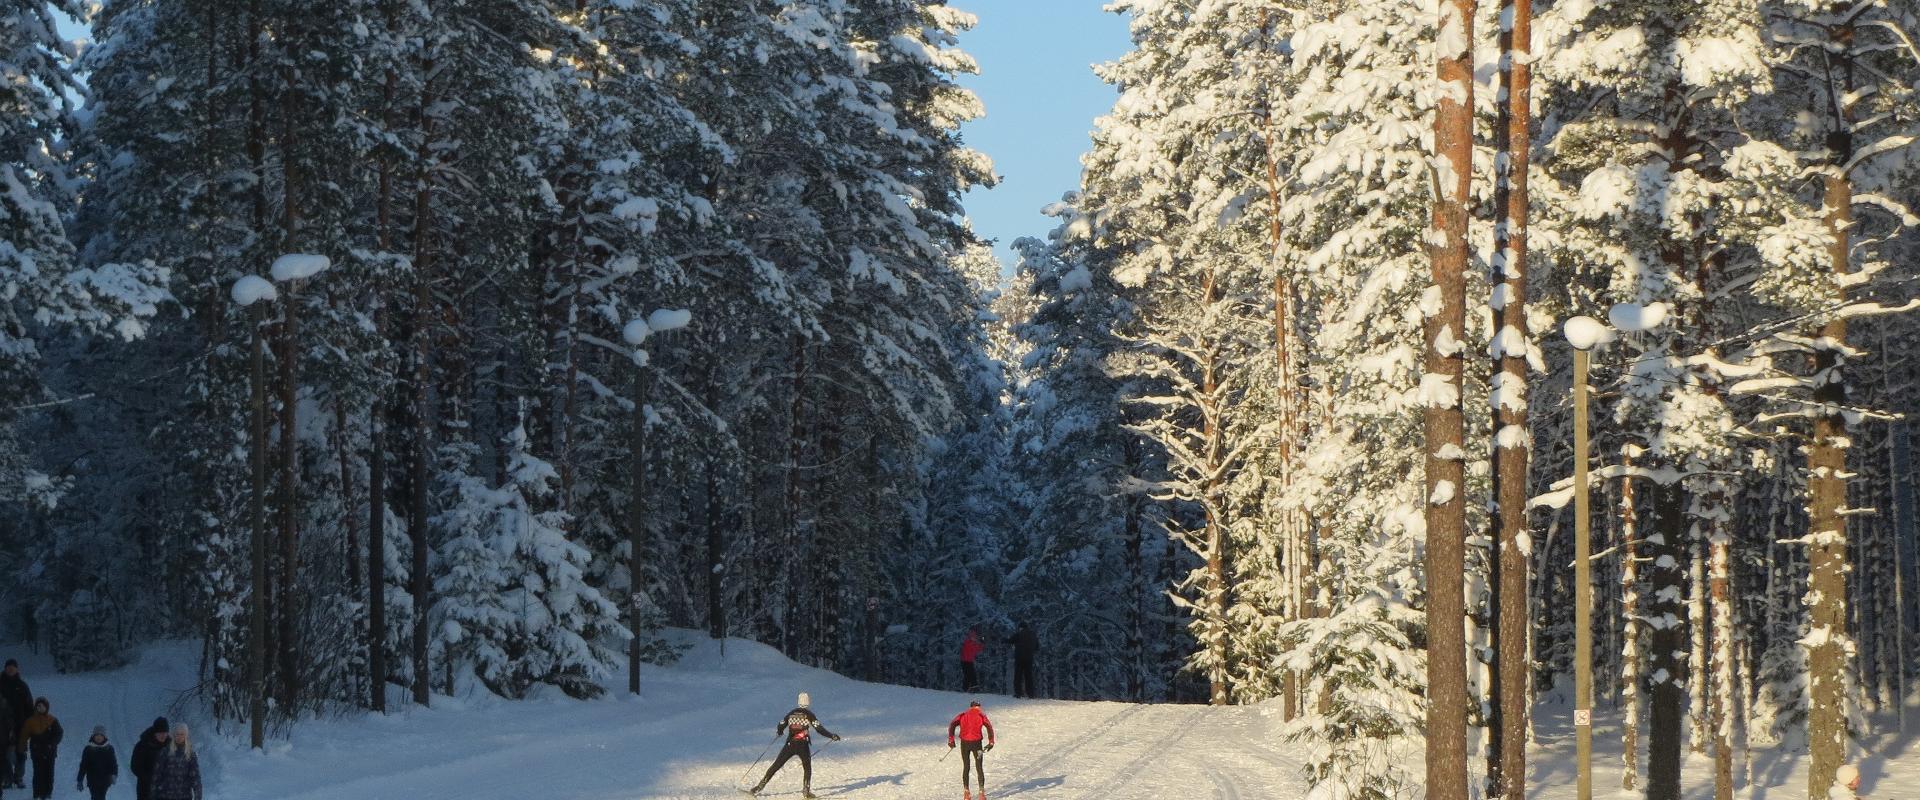 The Alutaguse health and sports centre is situated close to Pannjärve in the Kurtna lakelands. The surrounding forests have trails measuring 1, 2, 3, 